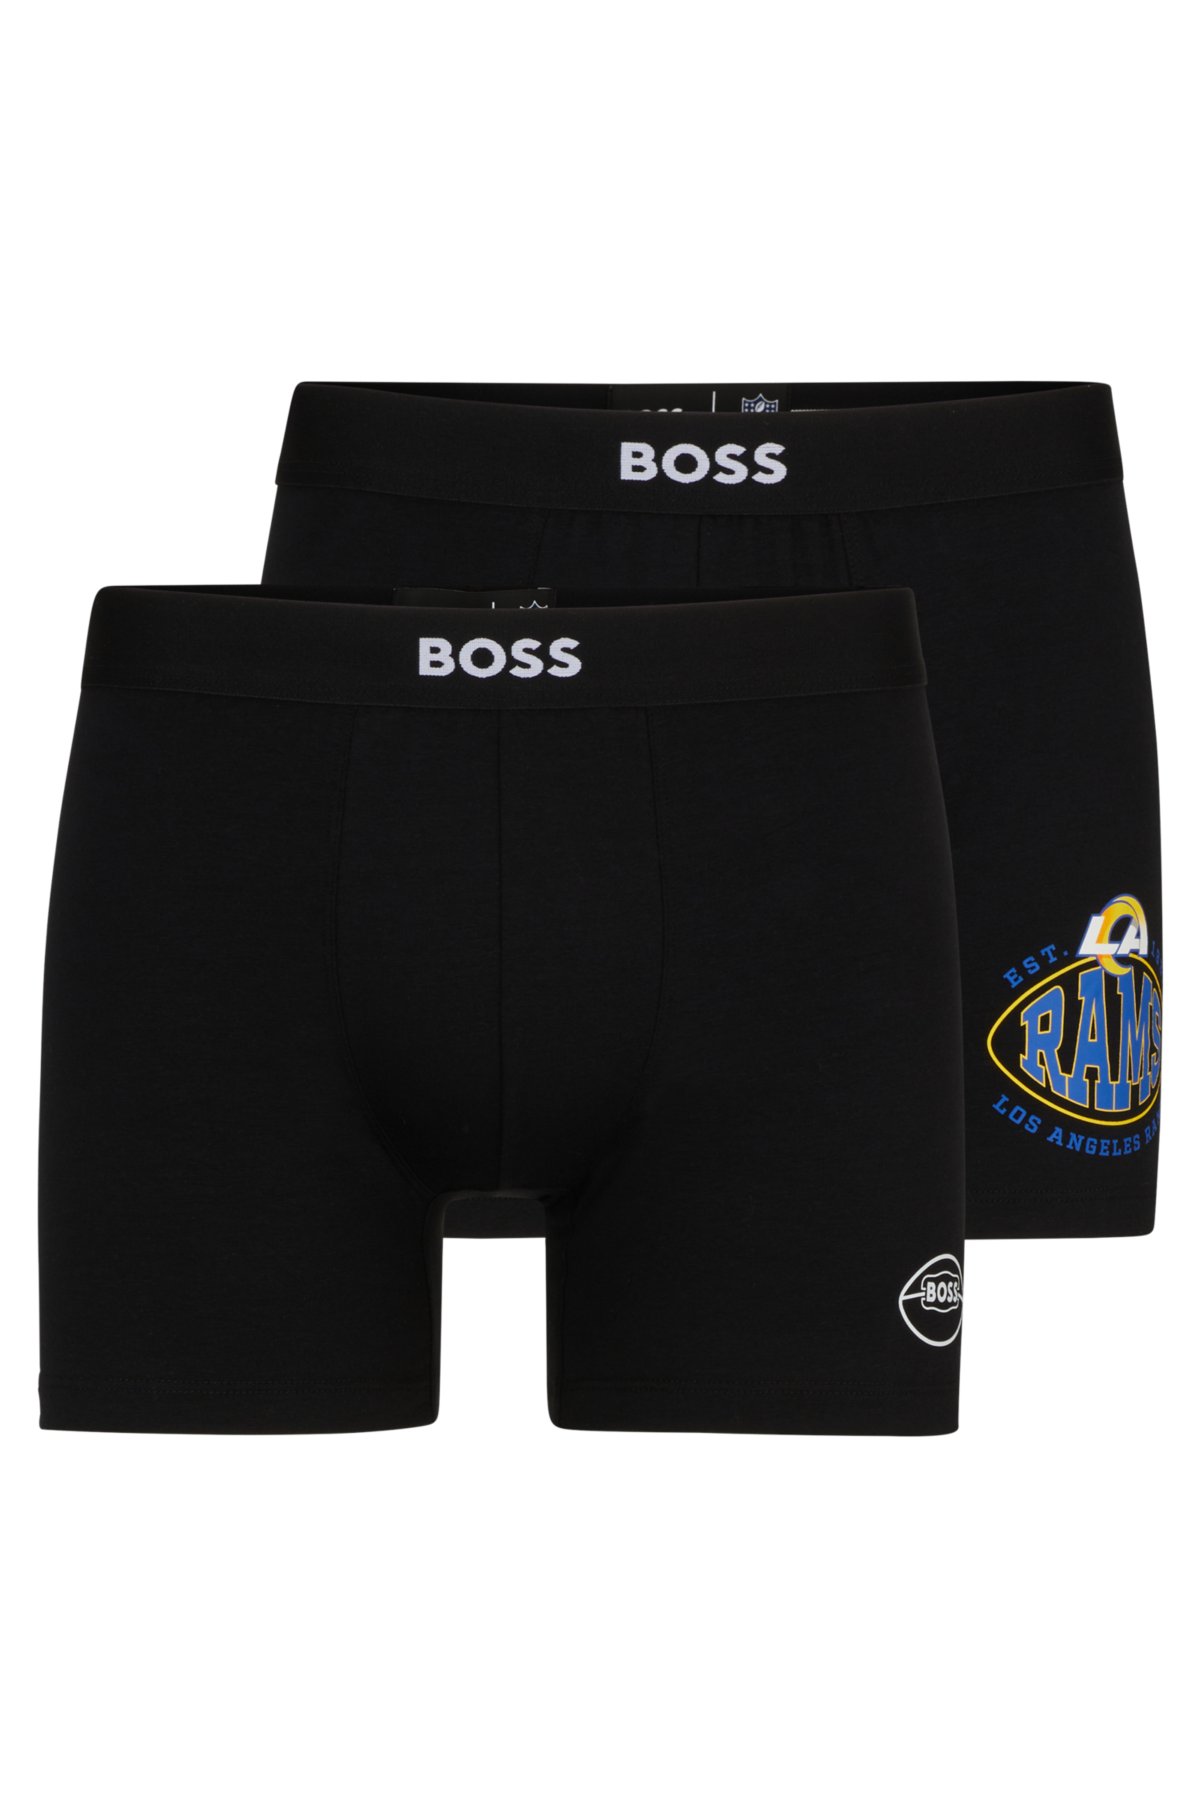 BOSS x NFL two-pack of boxer briefs with collaborative branding, Rams